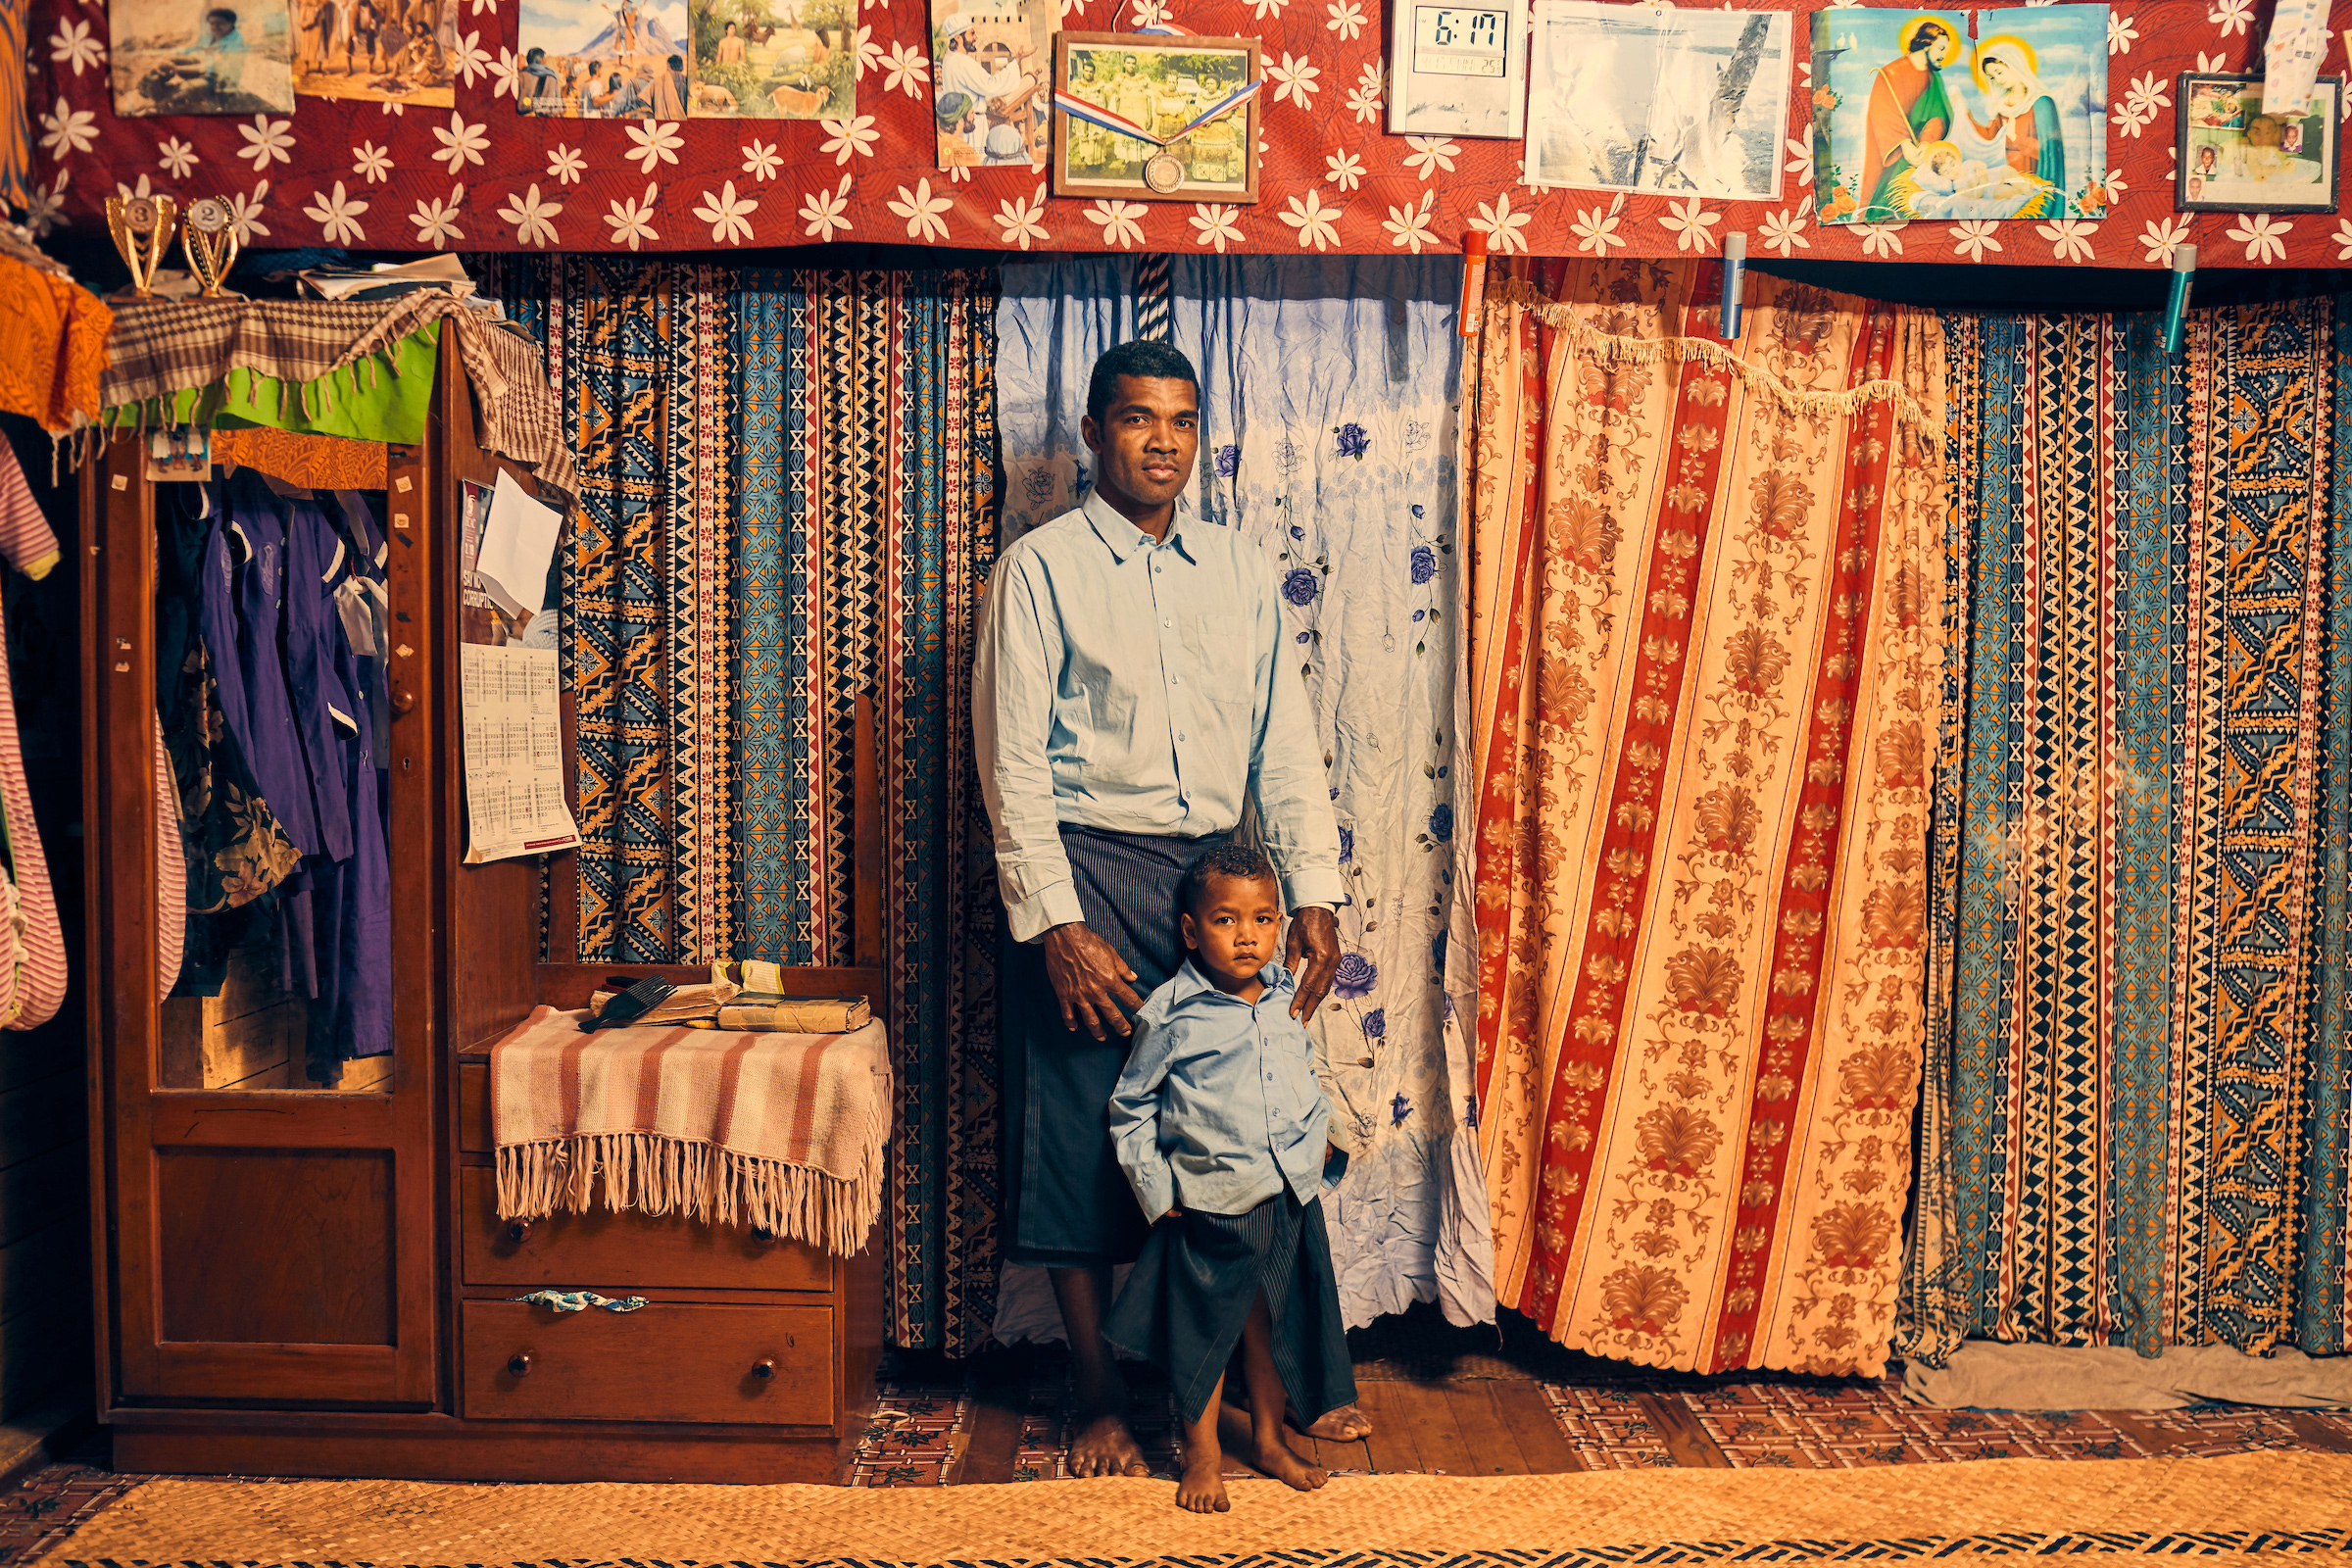 Apisai Logaivau and his family were relocated from their village due to the effects of climate change. Vunidogoloa was the first place in Fiji to relocate, but it won't be the last. (Christopher Gregory for TIME)